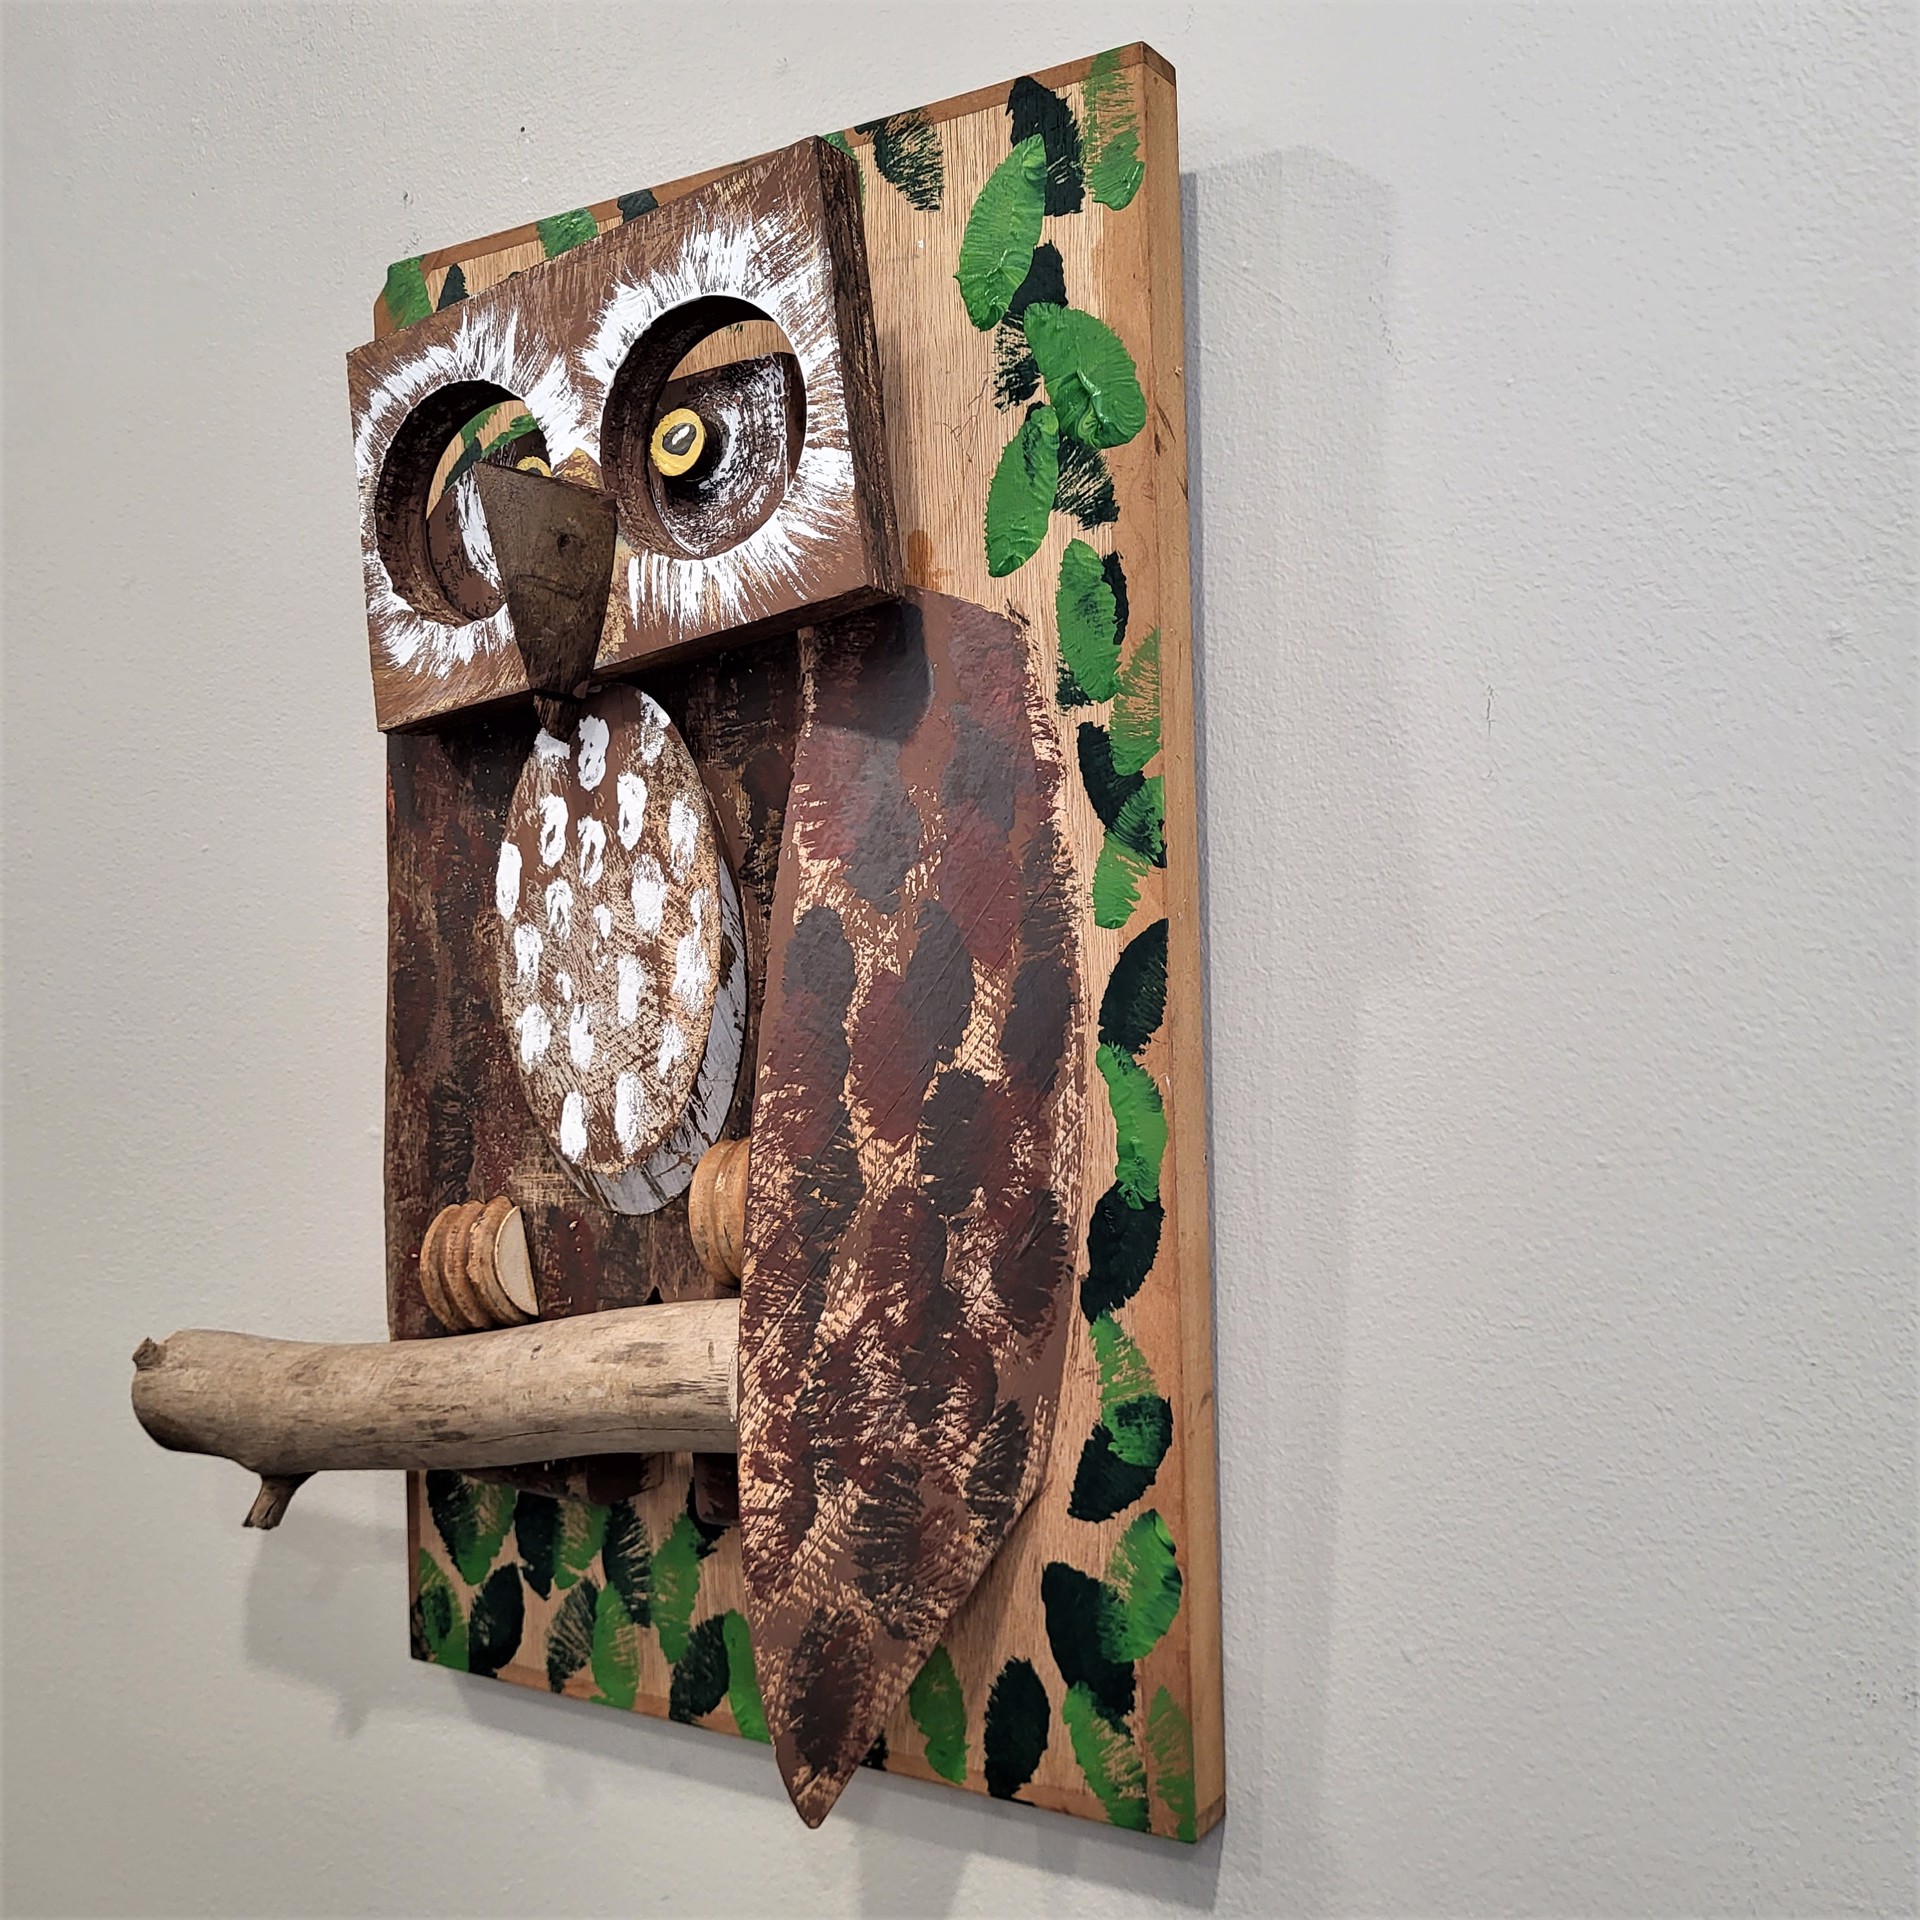 SAW WHET OWL by ANDRE BENOIT